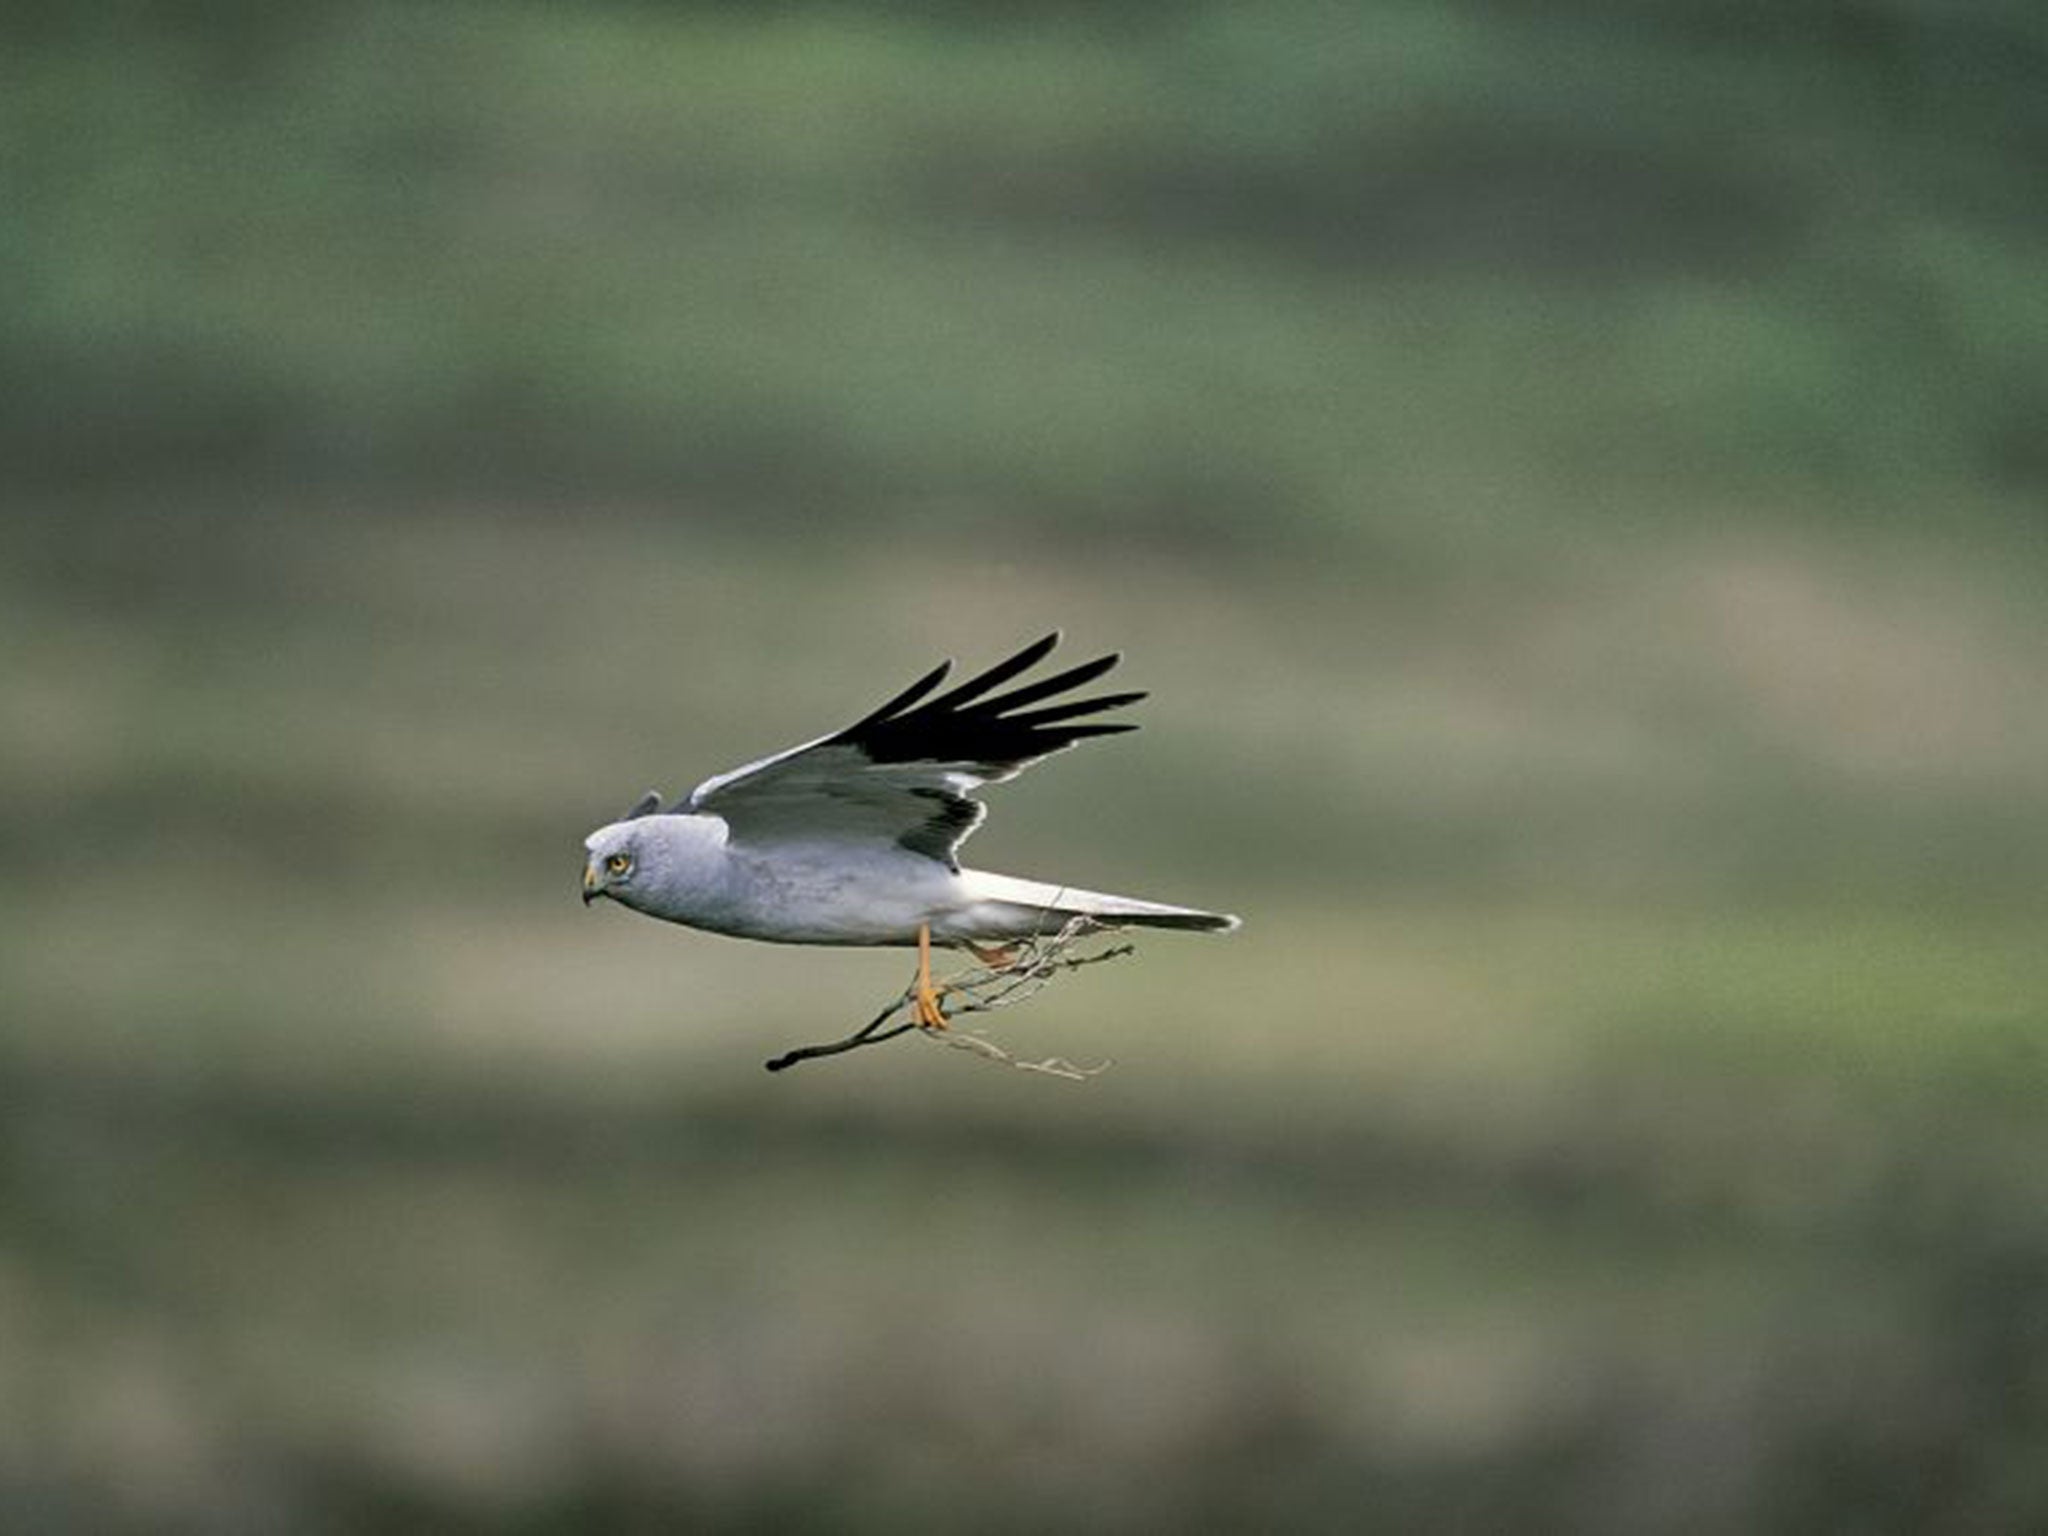 There are thought to be only a handful of nesting pairs of endangered Hen Harriers in England